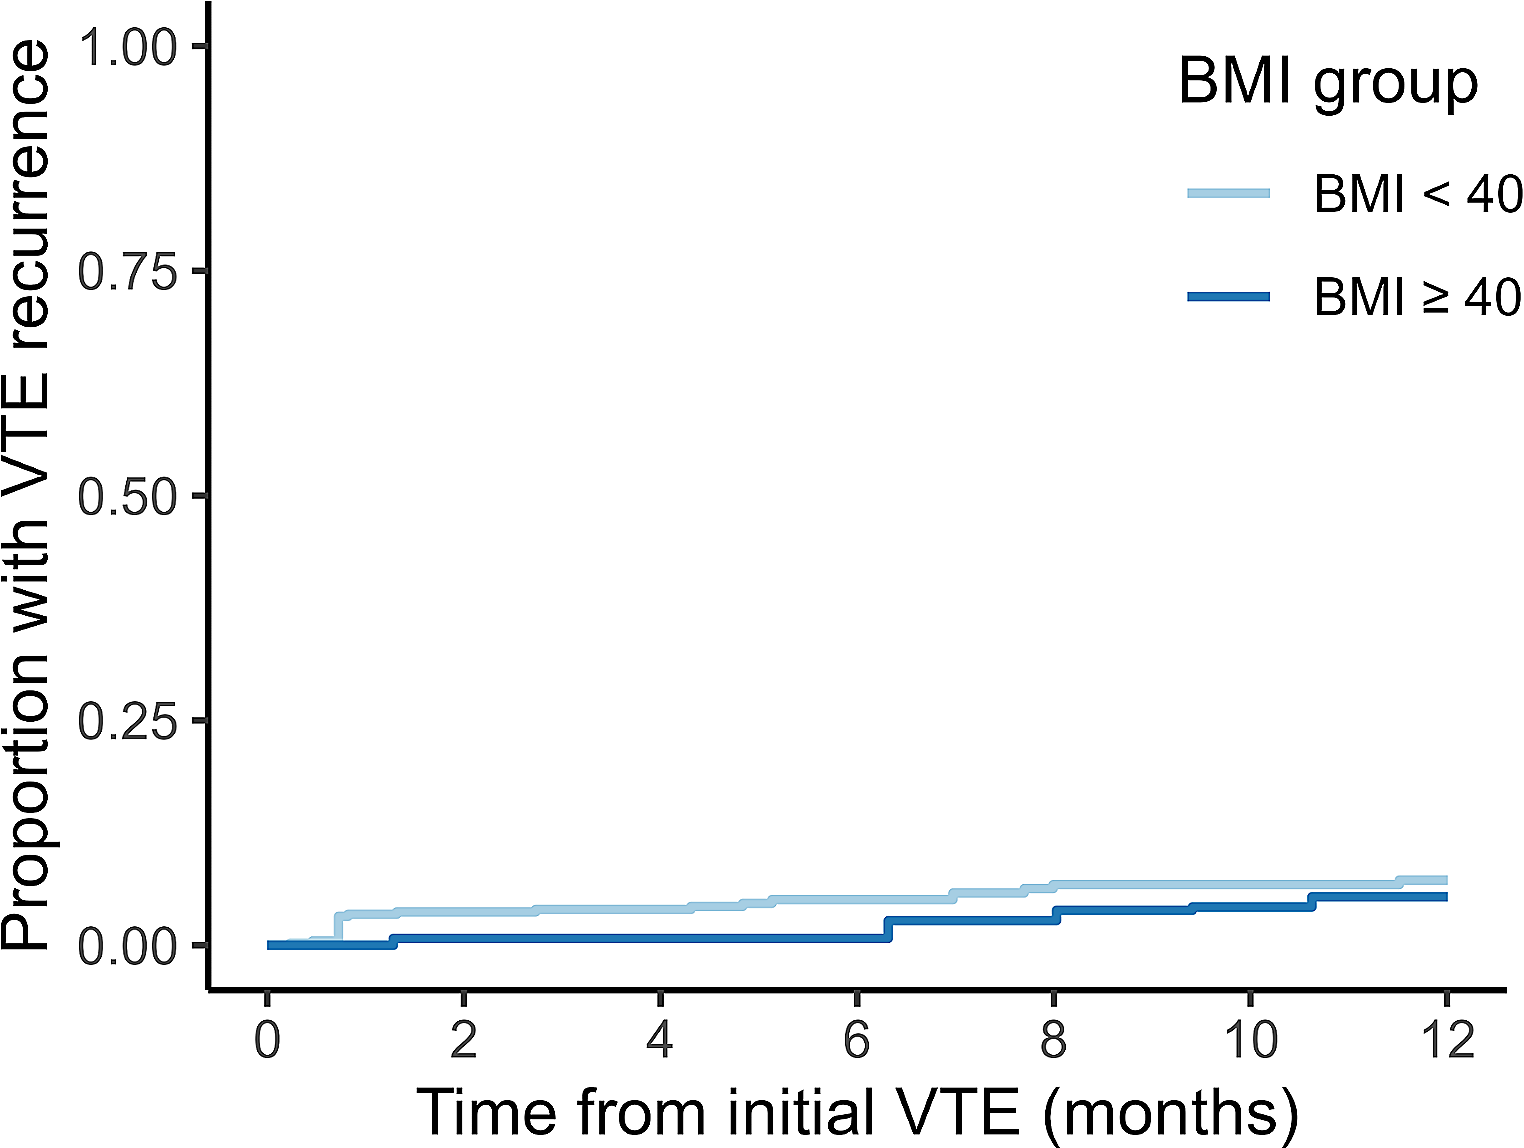 Retrospective, multicenter analysis of the safety and effectiveness of direct oral anticoagulants for the treatment of venous thromboembolism in obesity